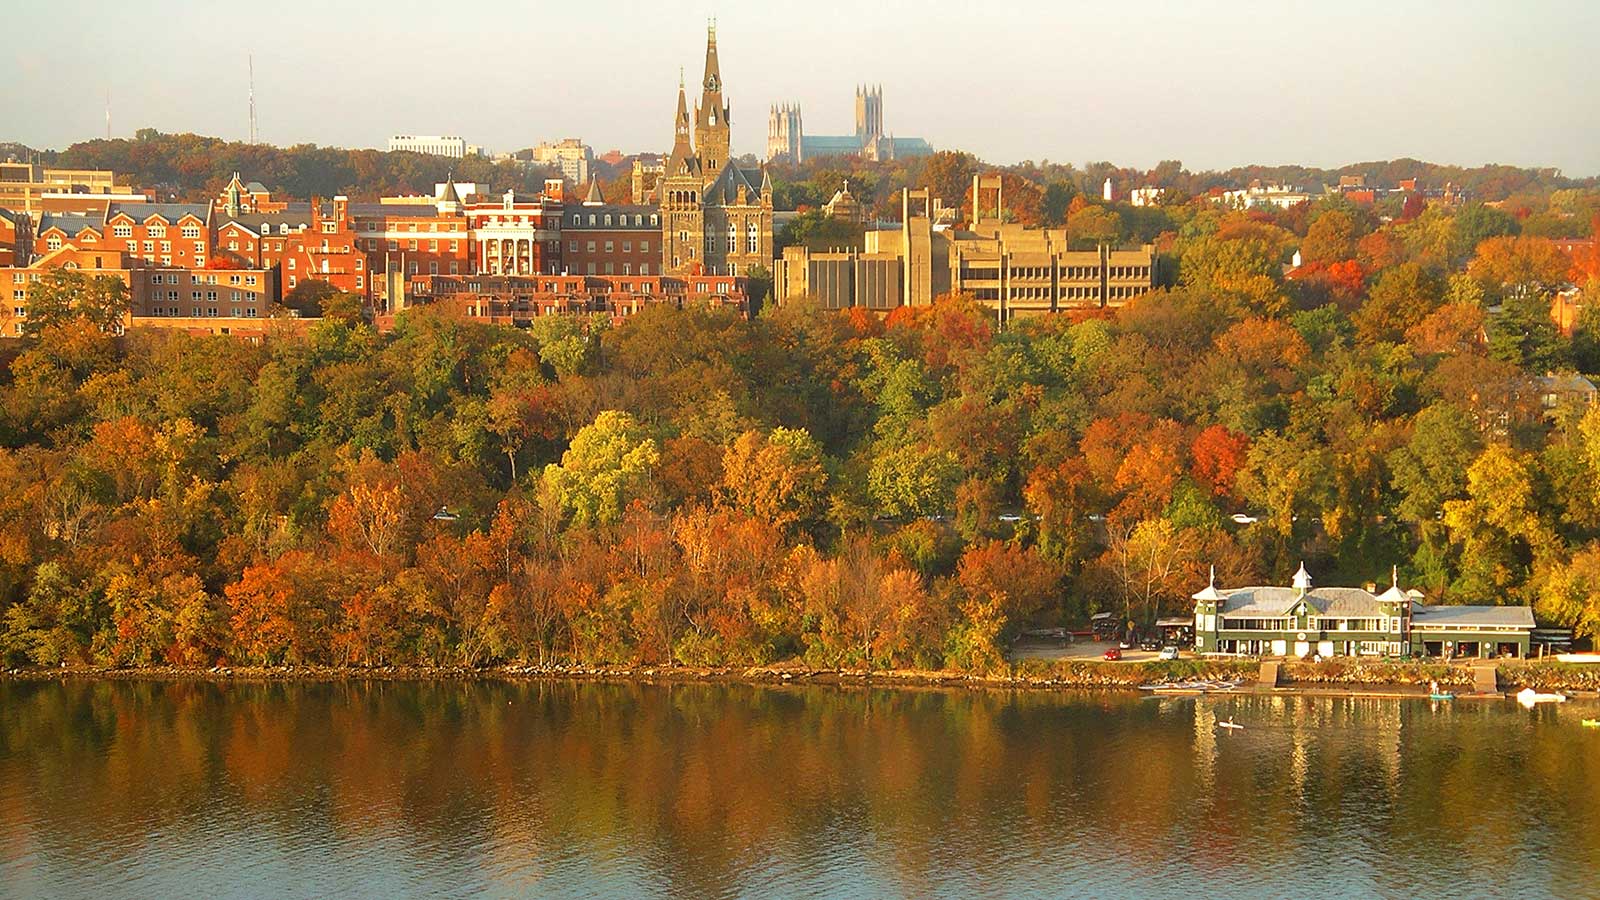 Georgetown University's main campus taken from the top floor of the Key Bridge Marriott. Washington National Cathedral is visible above campus, and the Washington Canoe Club is in the lower right, on the Potomac River